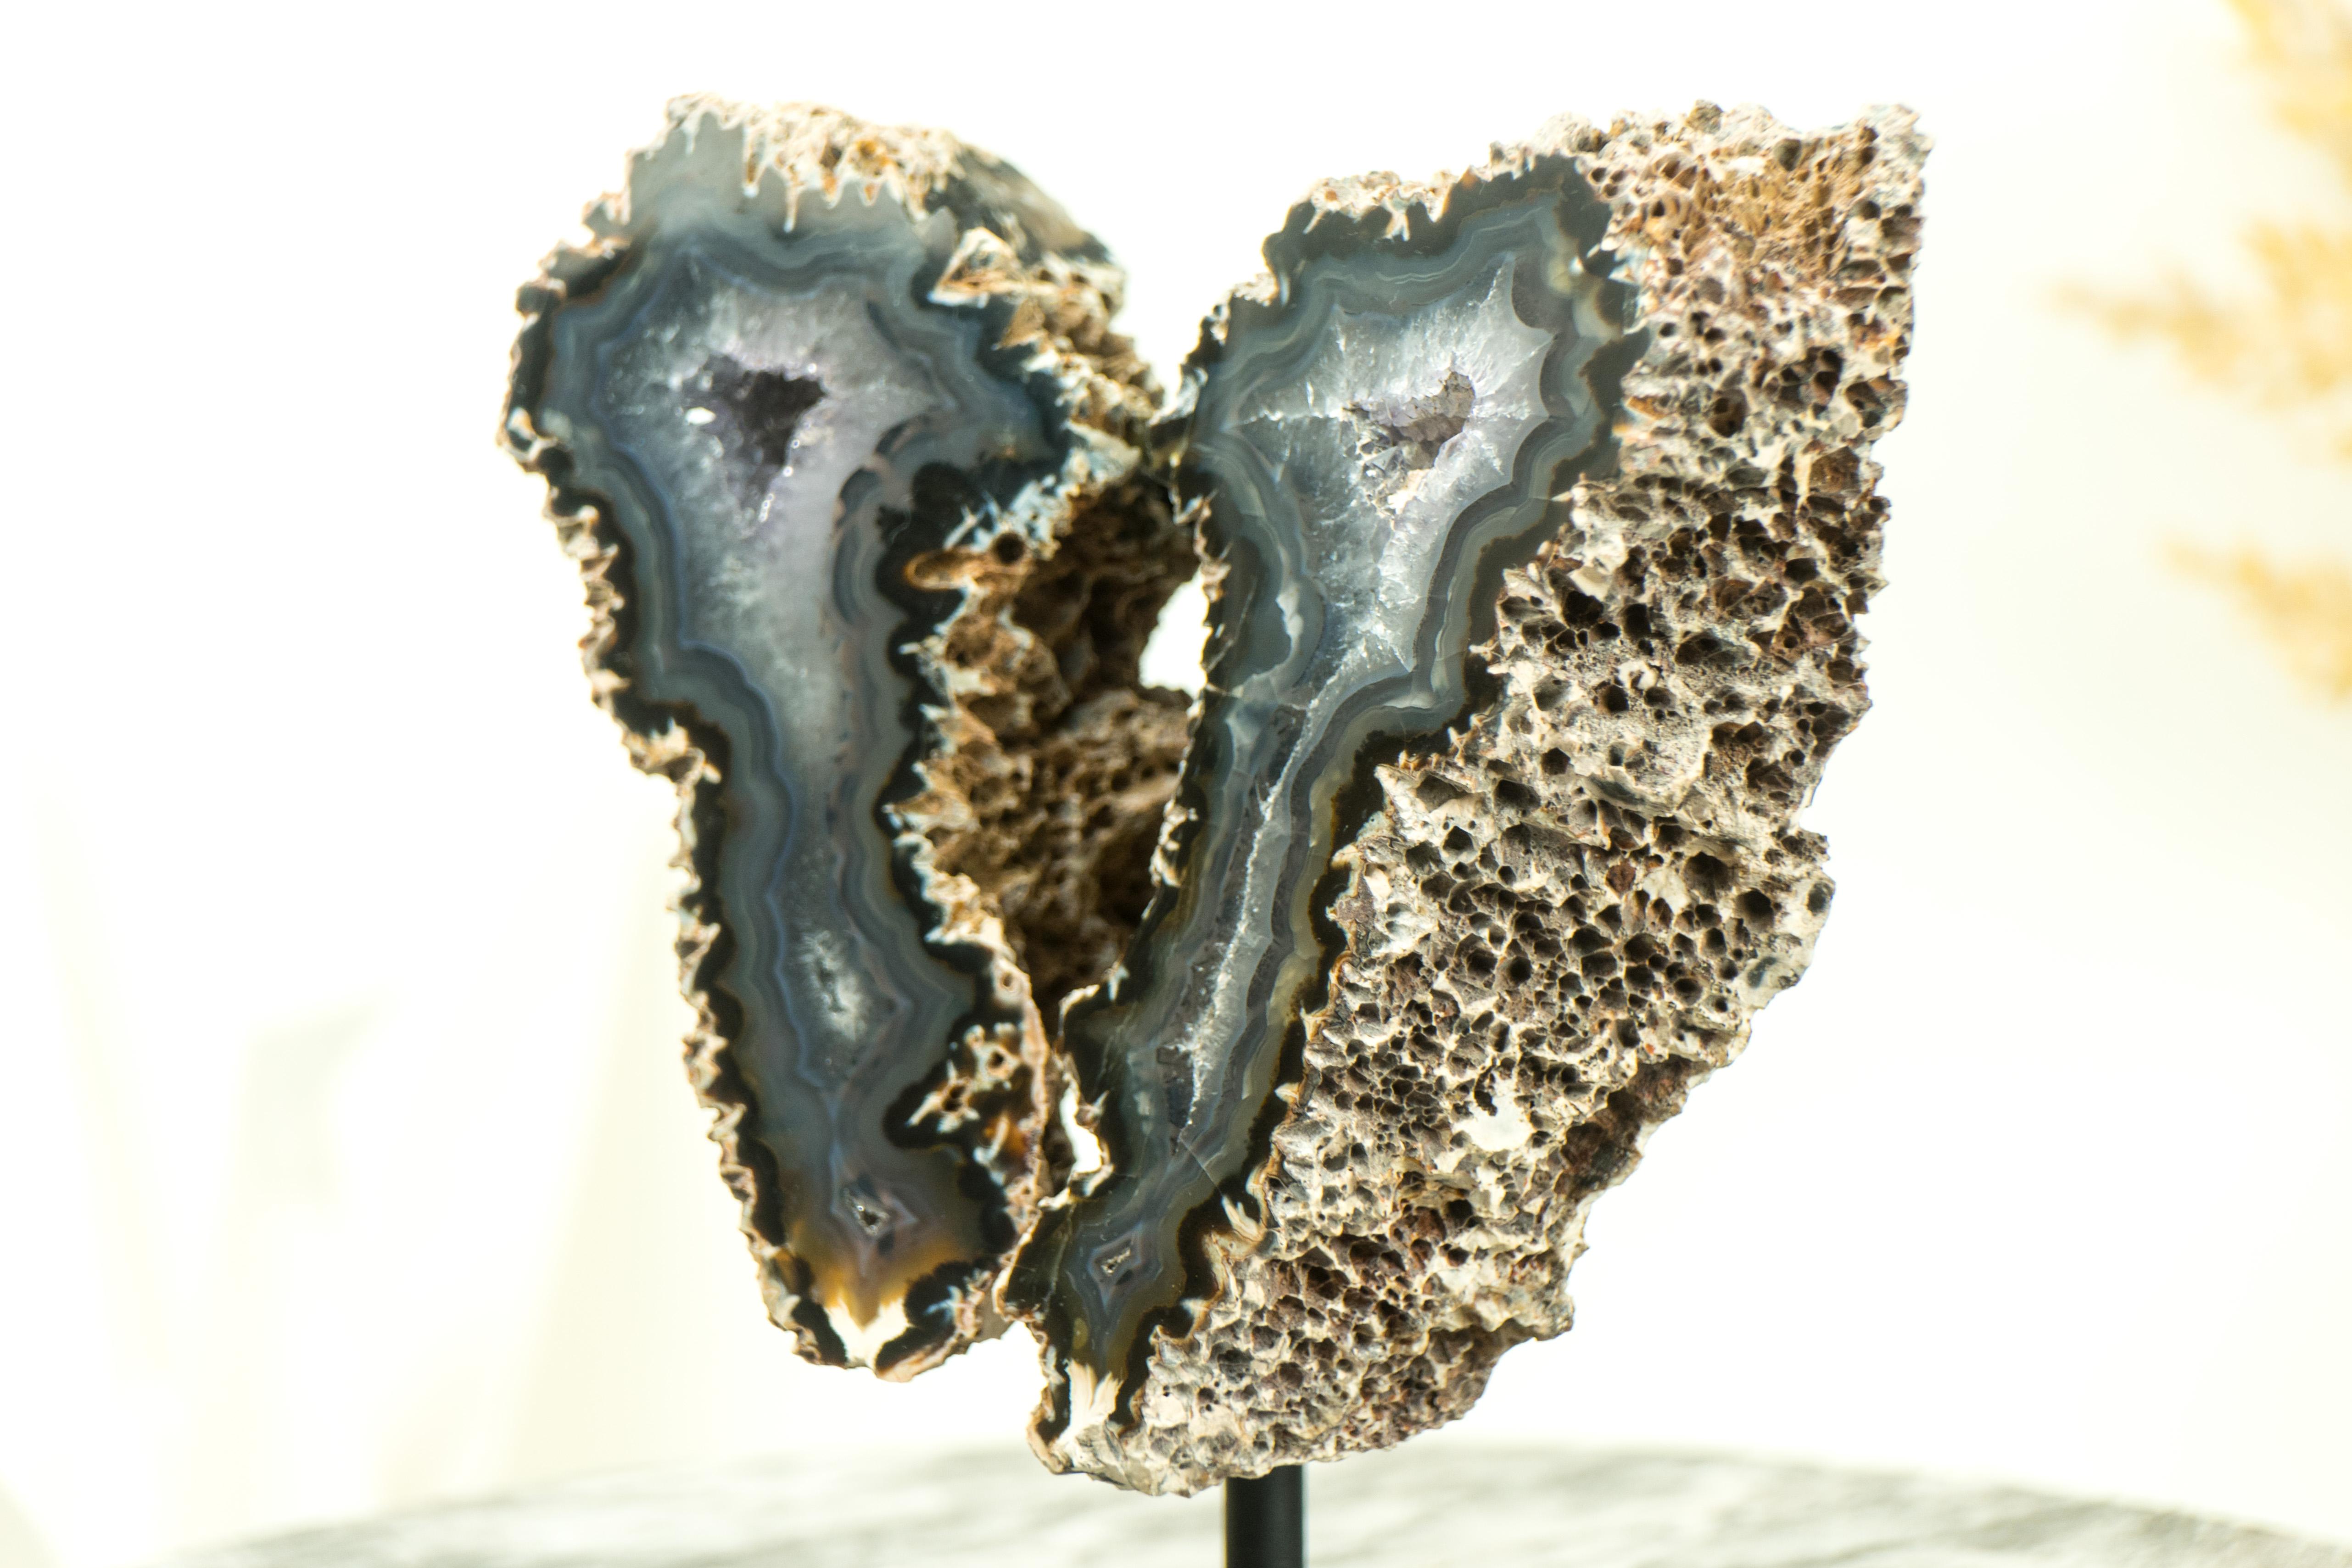 Small Spiky Lace Agate Geode with Druzy, in Butterfly Wings Format, Intact For Sale 4